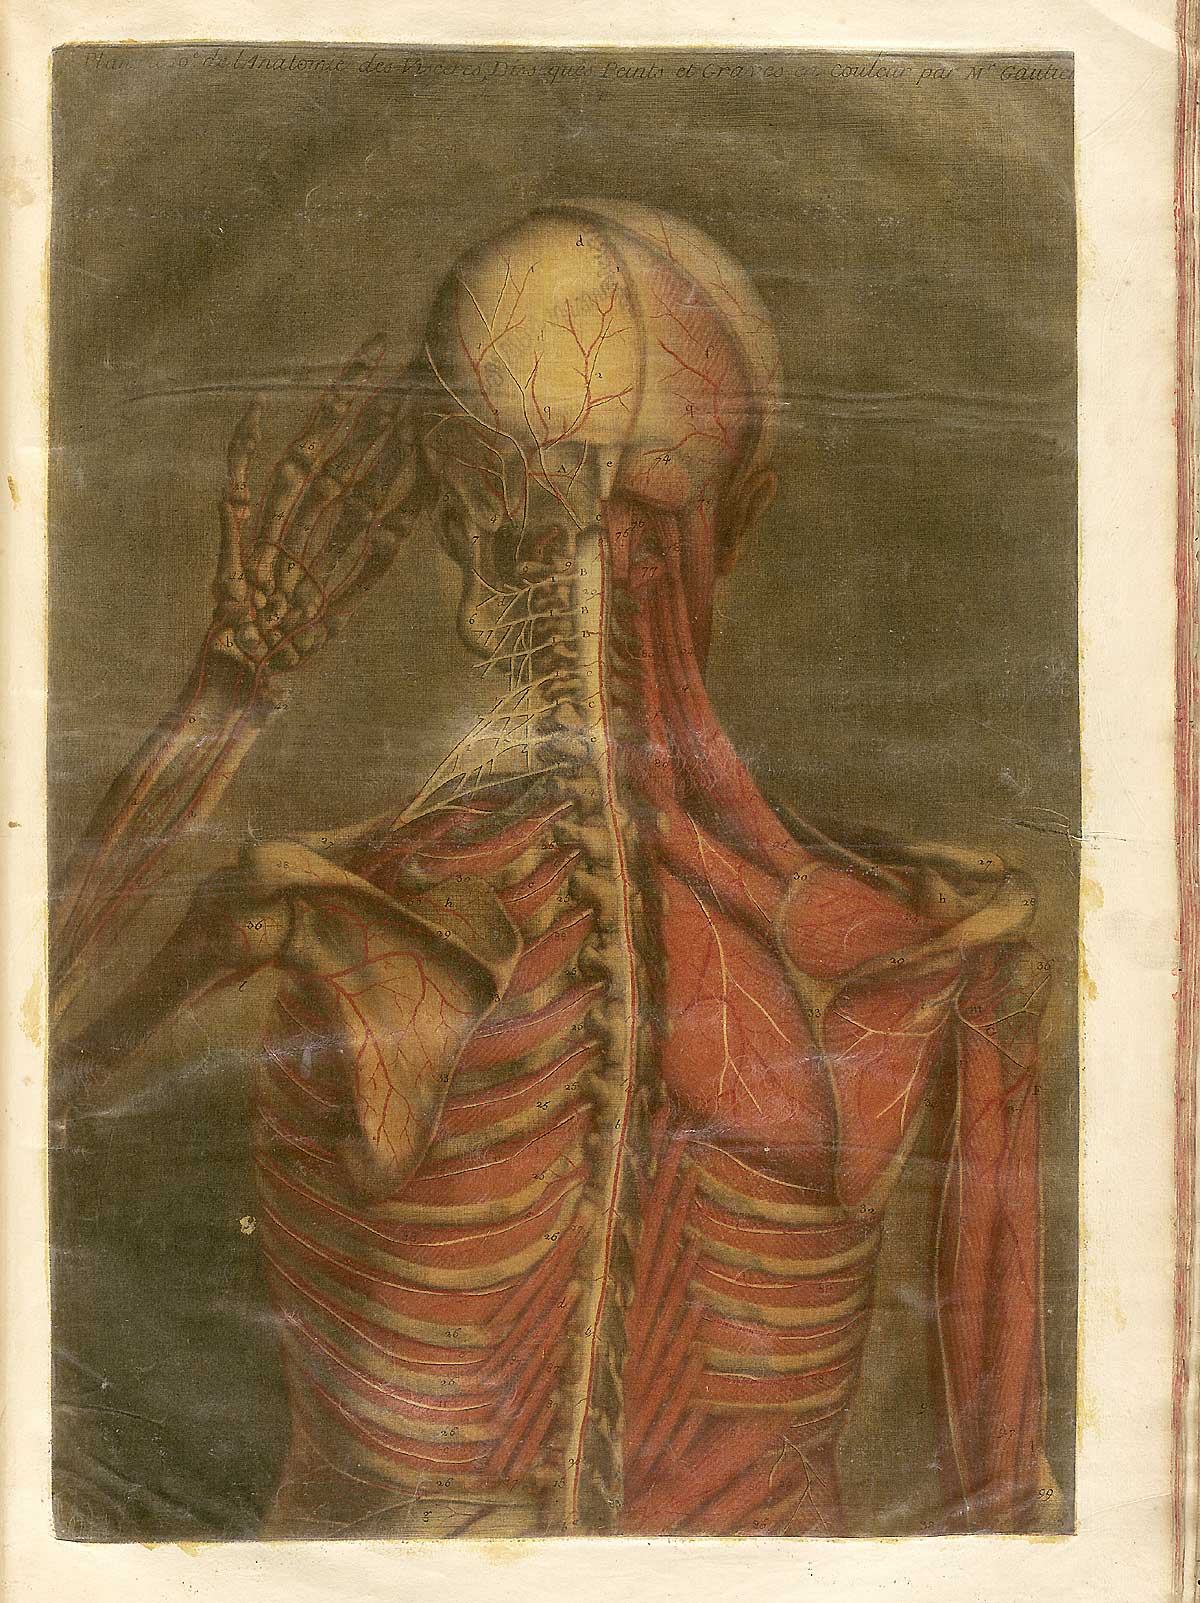 Color mezzotint of a human figure viewed from behind with most of the flesh removed to reveal the muscles and skeleton of the back of the head, shoulders and back.